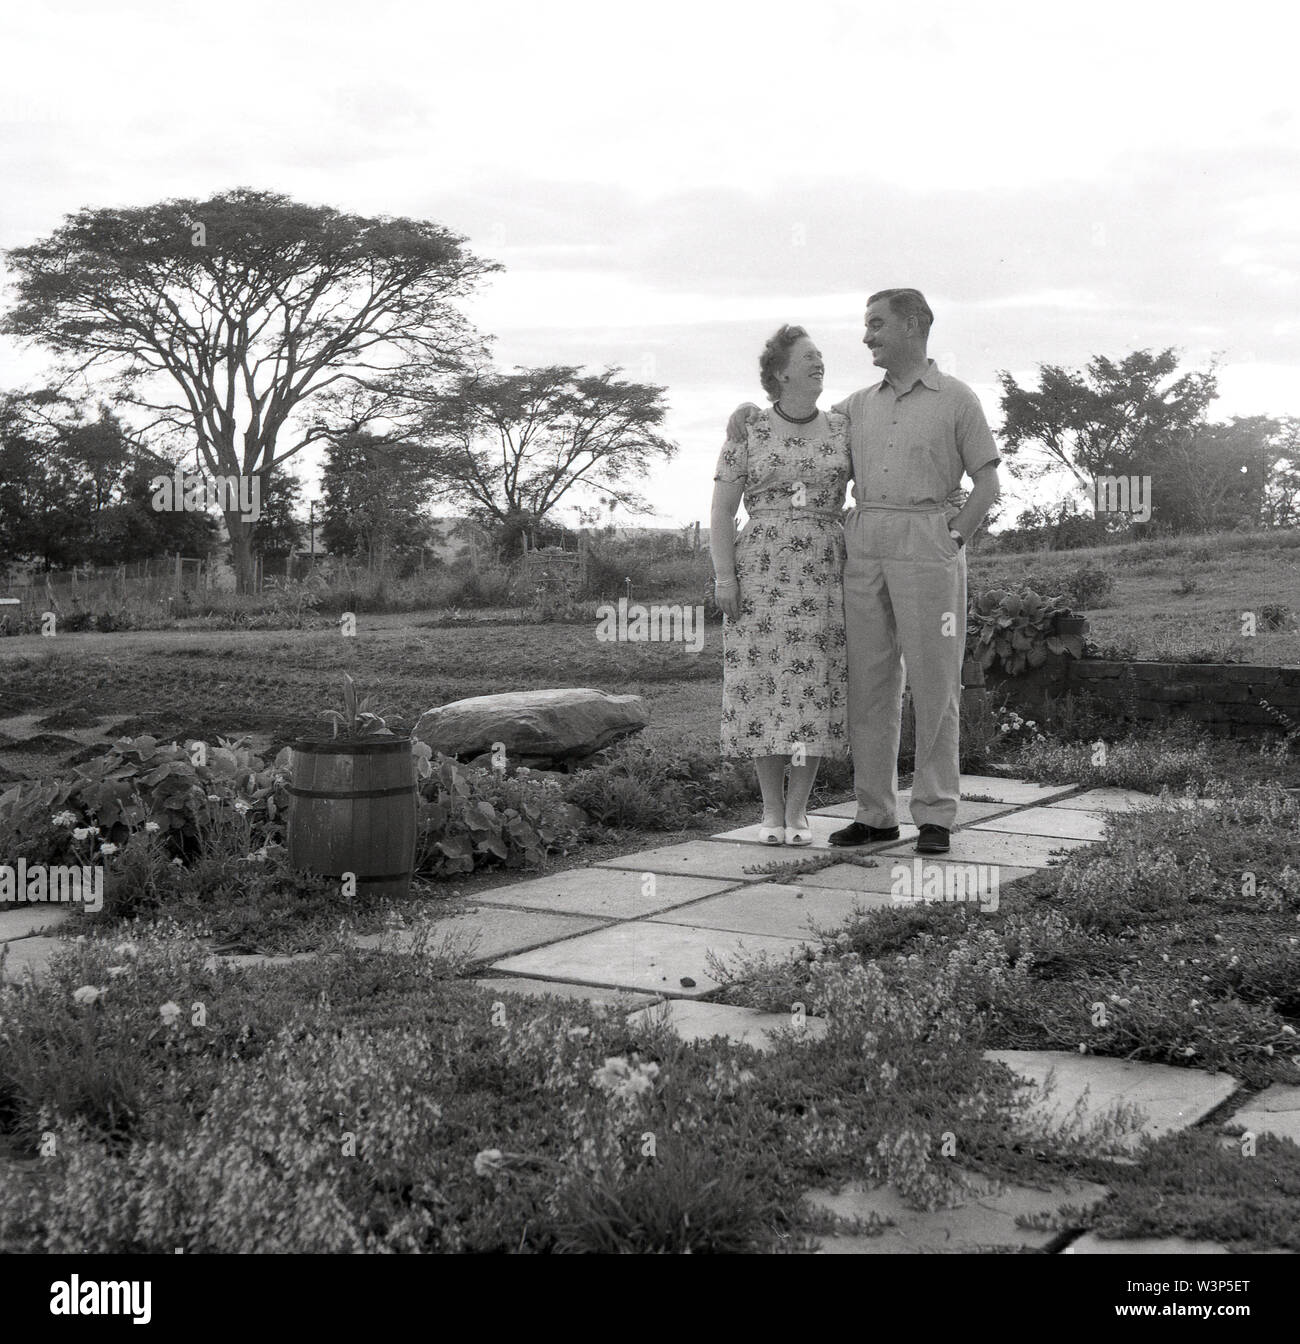 1950s, historical, Elderly British couple standing together outside their property, Uganda. The African country was a British protectorate from 1894 to 1962 and after WW11 many ex-army officers stayed on to start a new life there particuarly in farming the land. Stock Photo